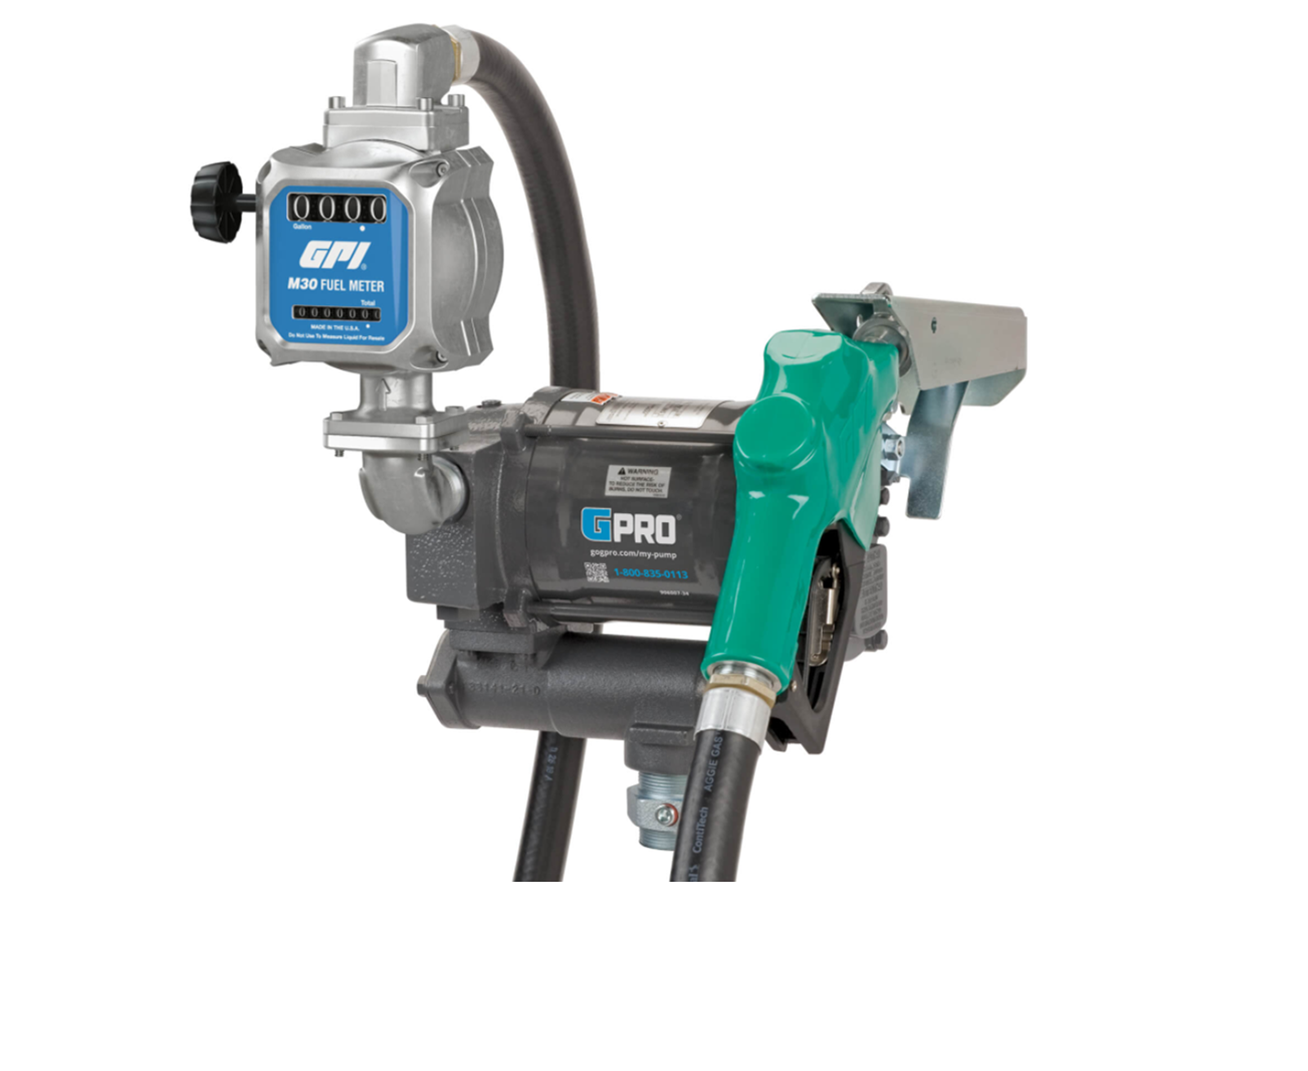 Electric pump GPI #PRO20-115AD/M30-L8N (R663Q-4-00), 110 volts, 76LPM (20GPM) with meter M30 display in litres, automatic nozzle 1", hose 1"x14ft, suction pipe not include